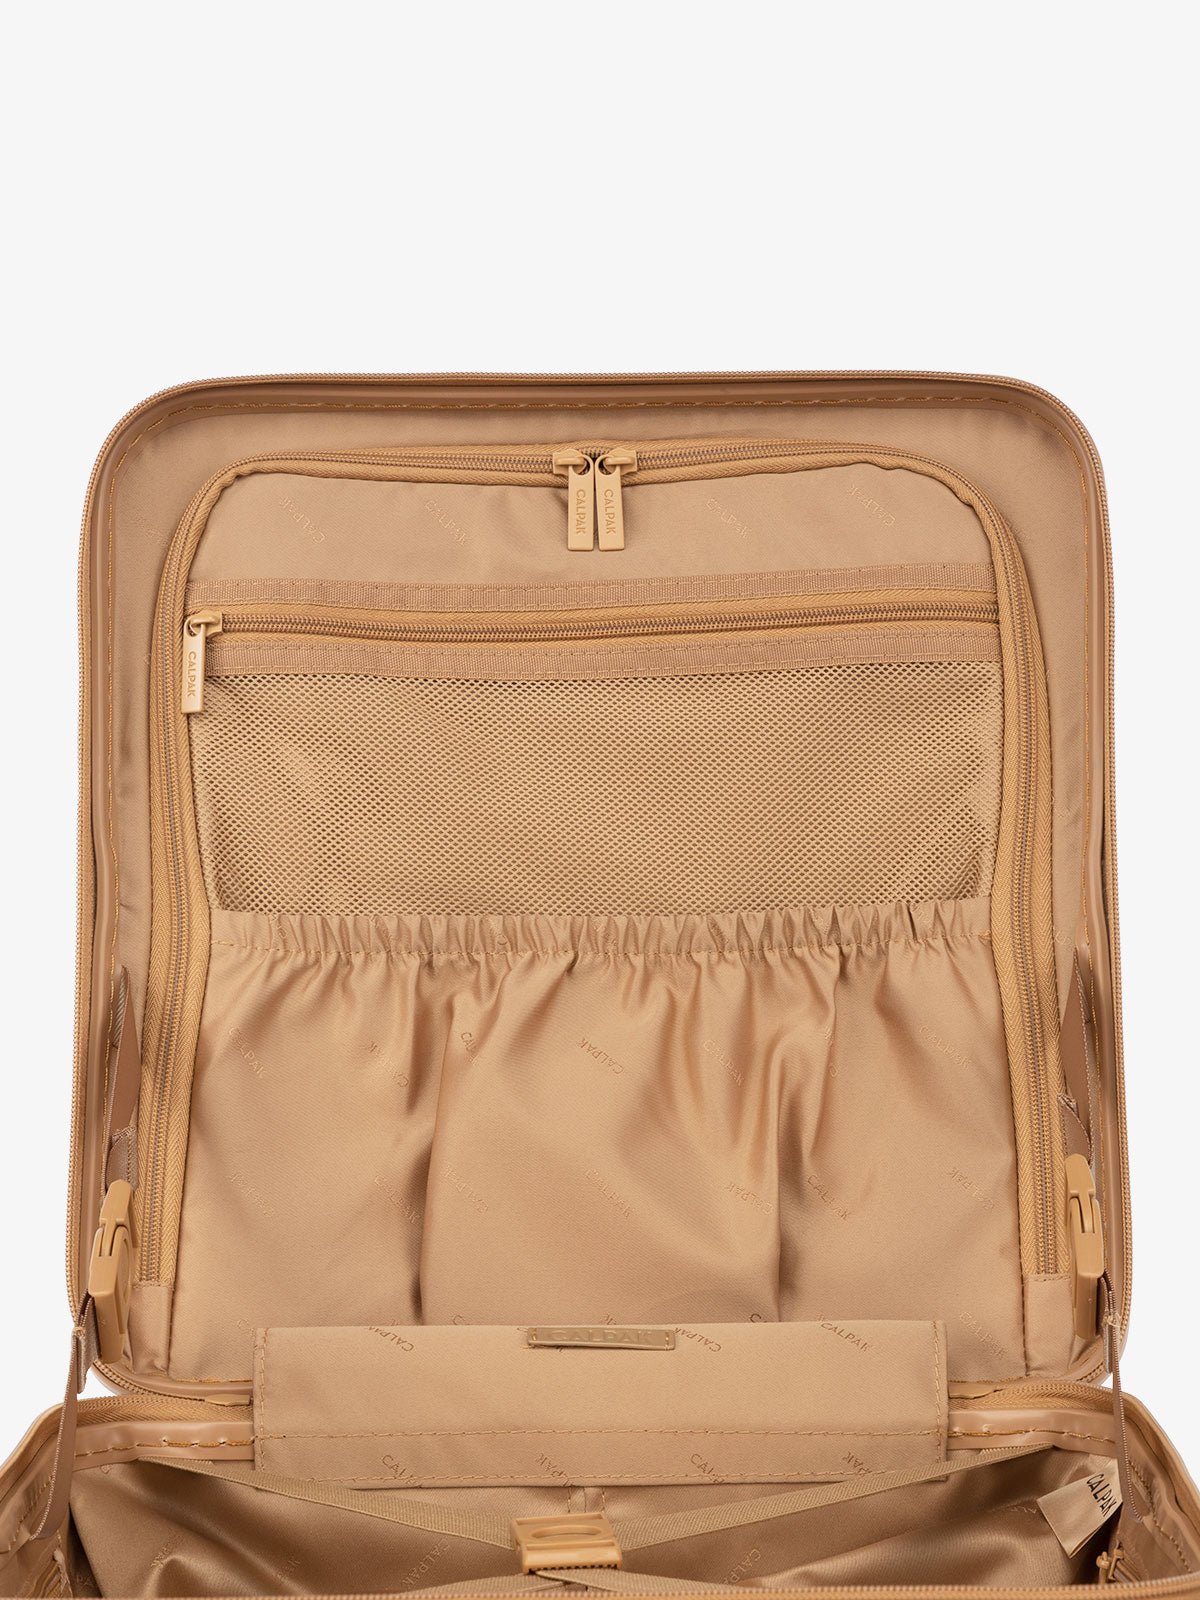 CALPAK TRNK small carry on luggage with divider and multiple compartments in almond